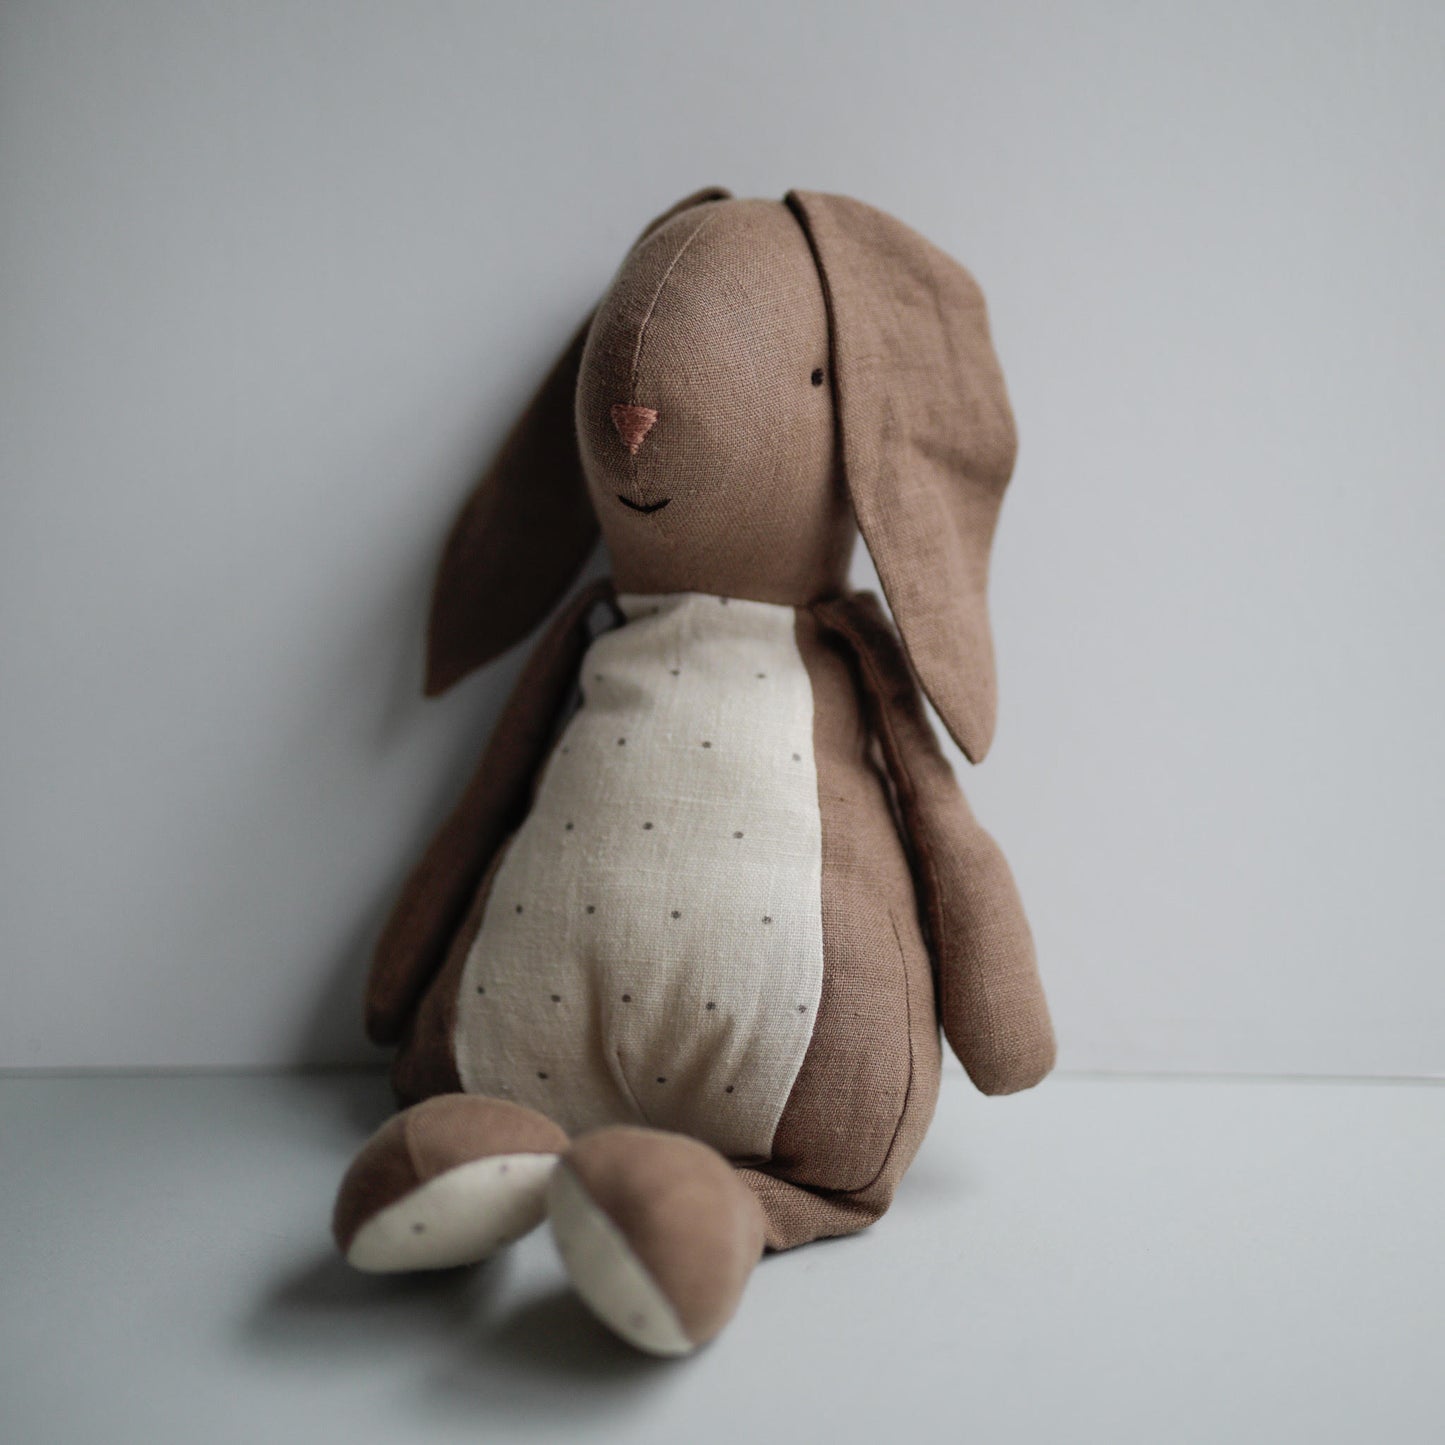 100% natural linen fabric My first Bunny toy